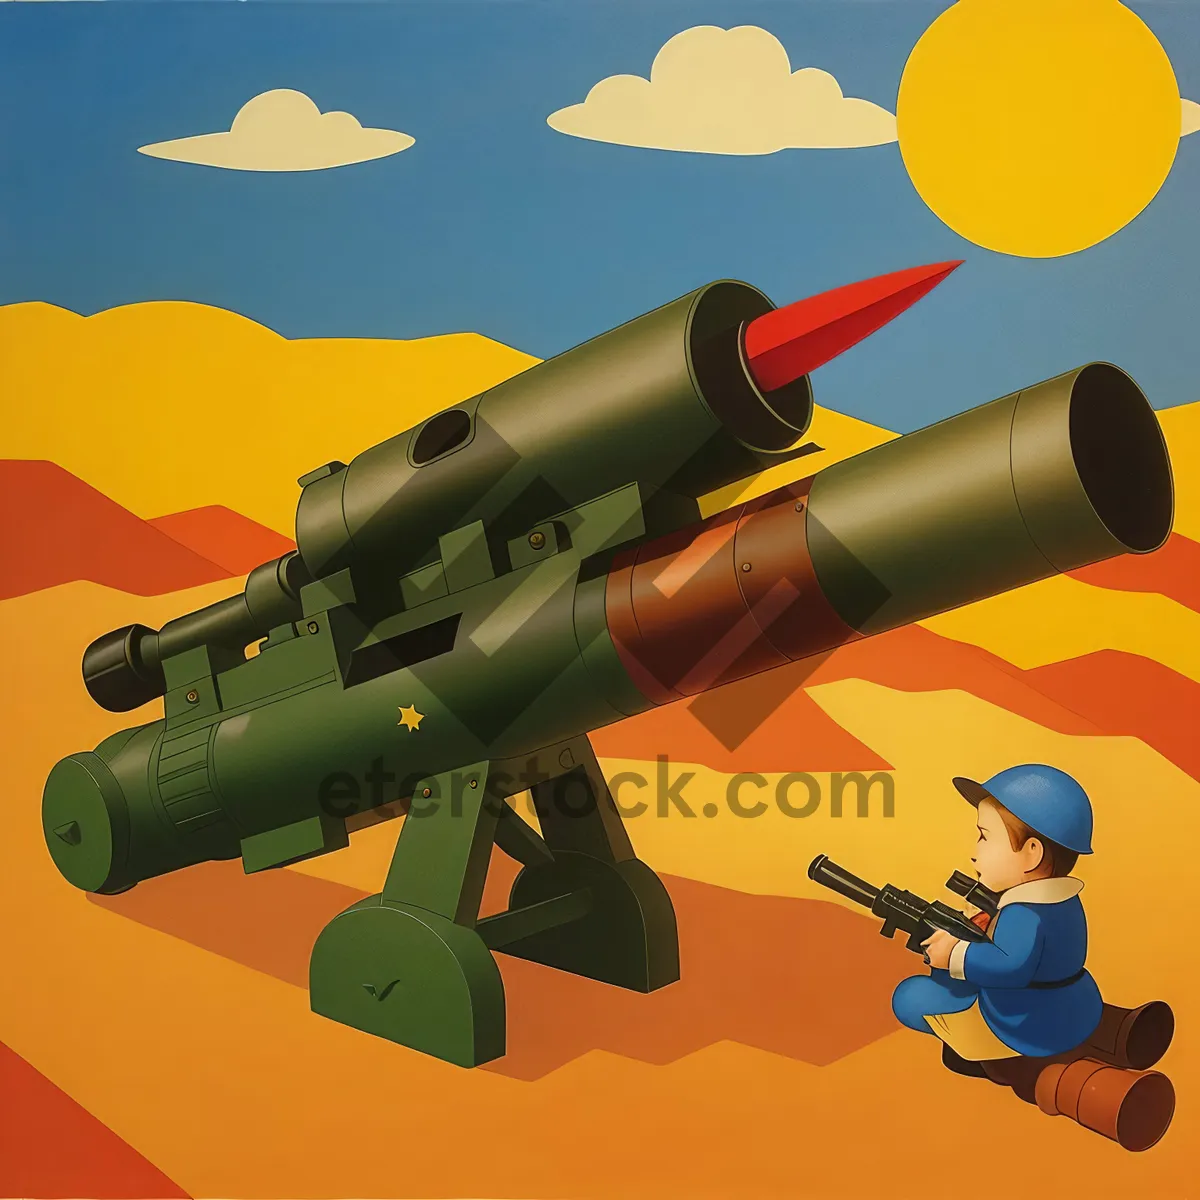 Picture of Rocket Launcher: Ultimate Armament for Devastating Missiles